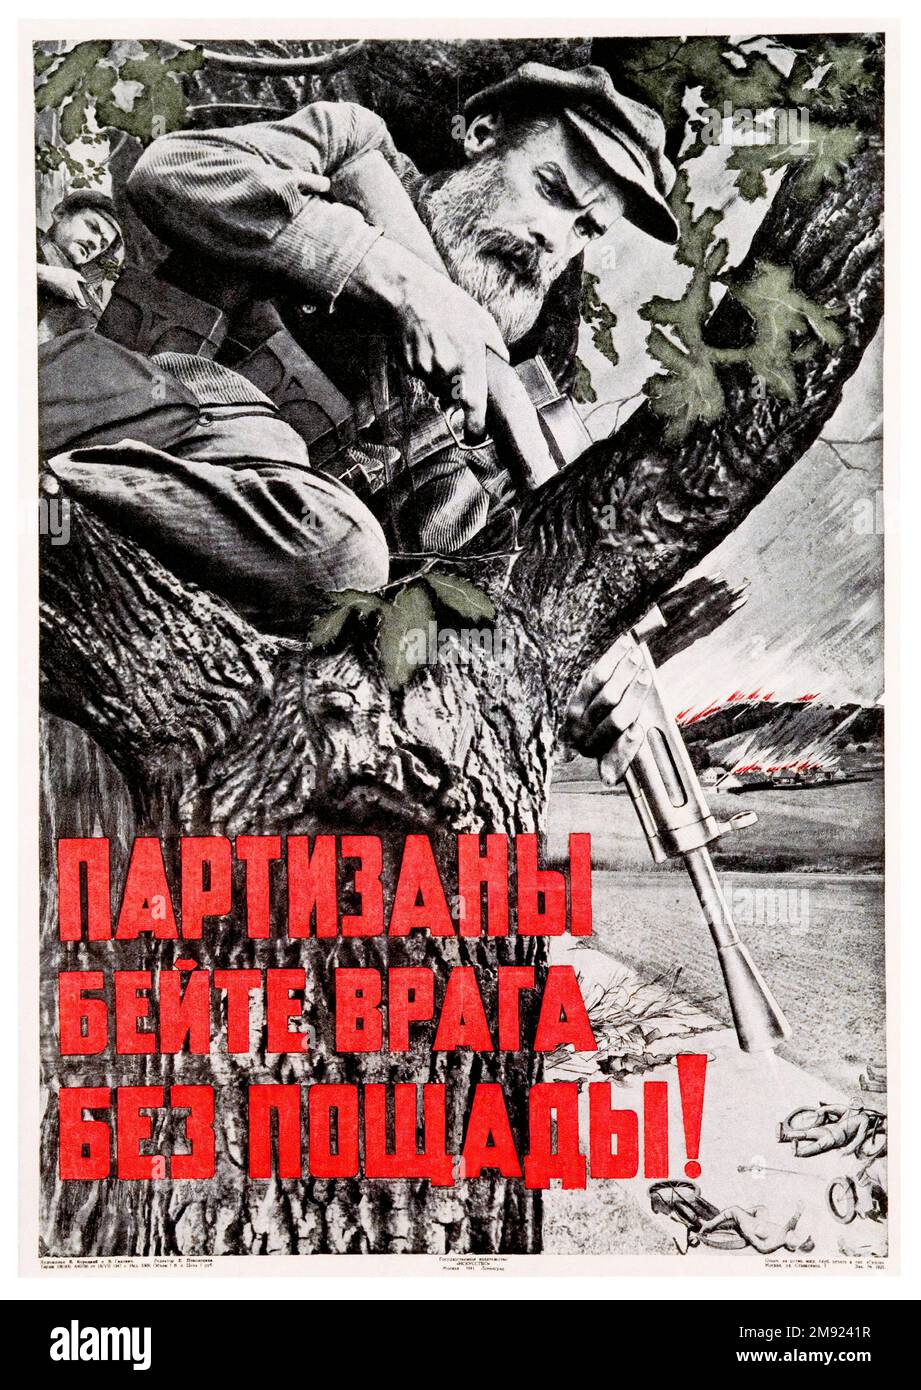 Partisans Batter the Enemies    -  (Translated from Russian) - Vintage USSR soviet propaganda poster Stock Photo